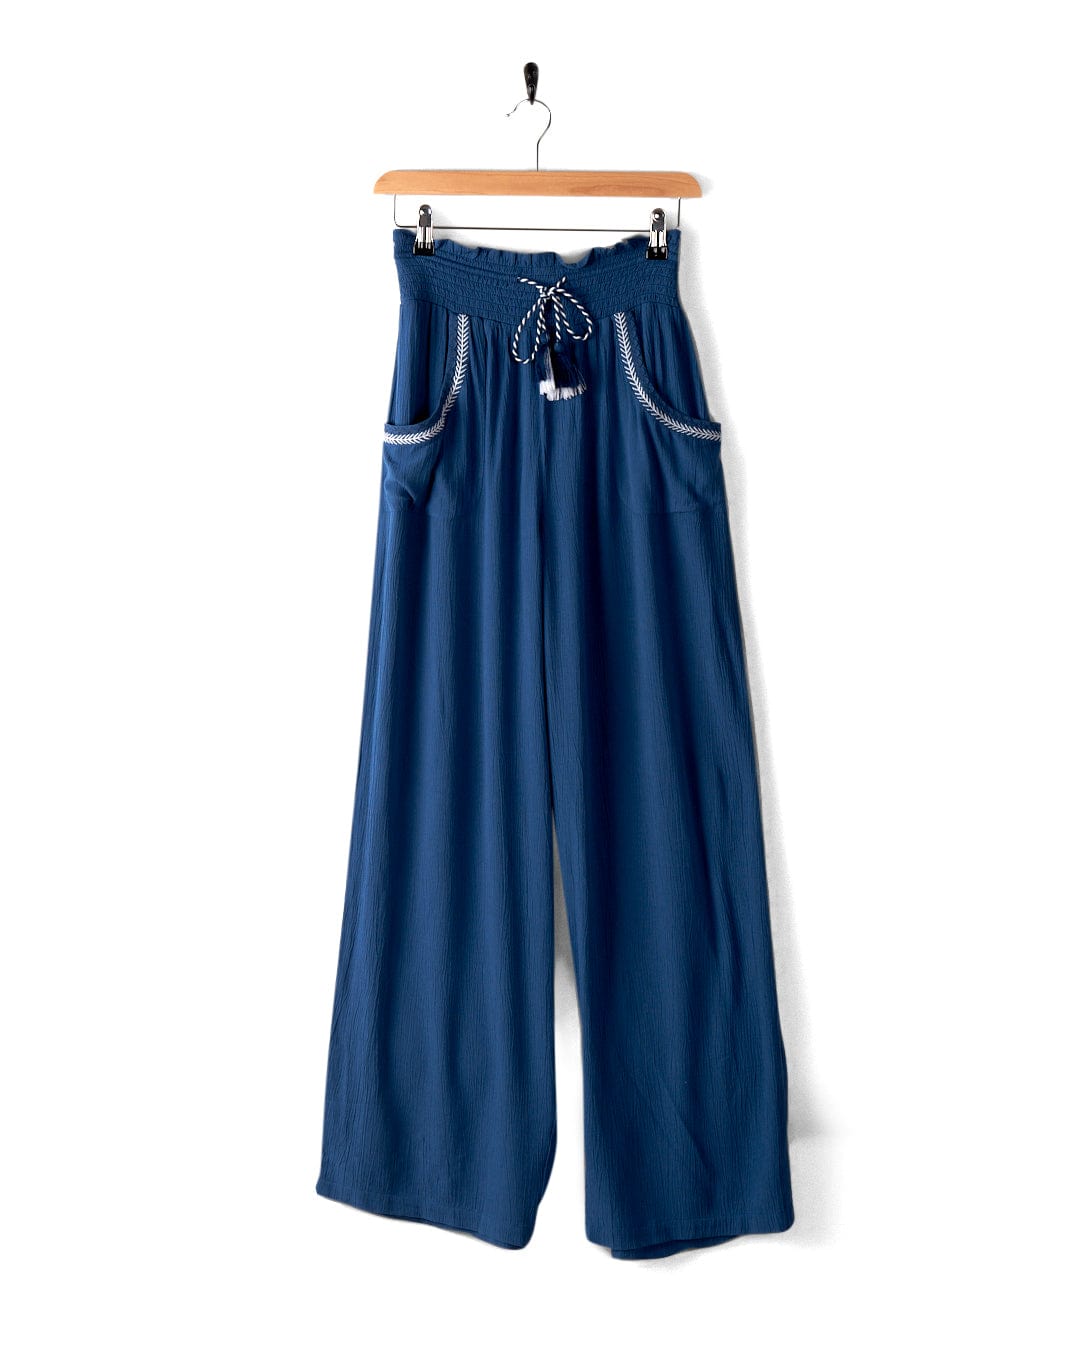 Jonie - Womens Trouser - Blue by Saltrock in a lightweight crinkle material, featuring an elastic high waistband with a decorative tie at the front and two front pockets, hanging on a wooden hanger.